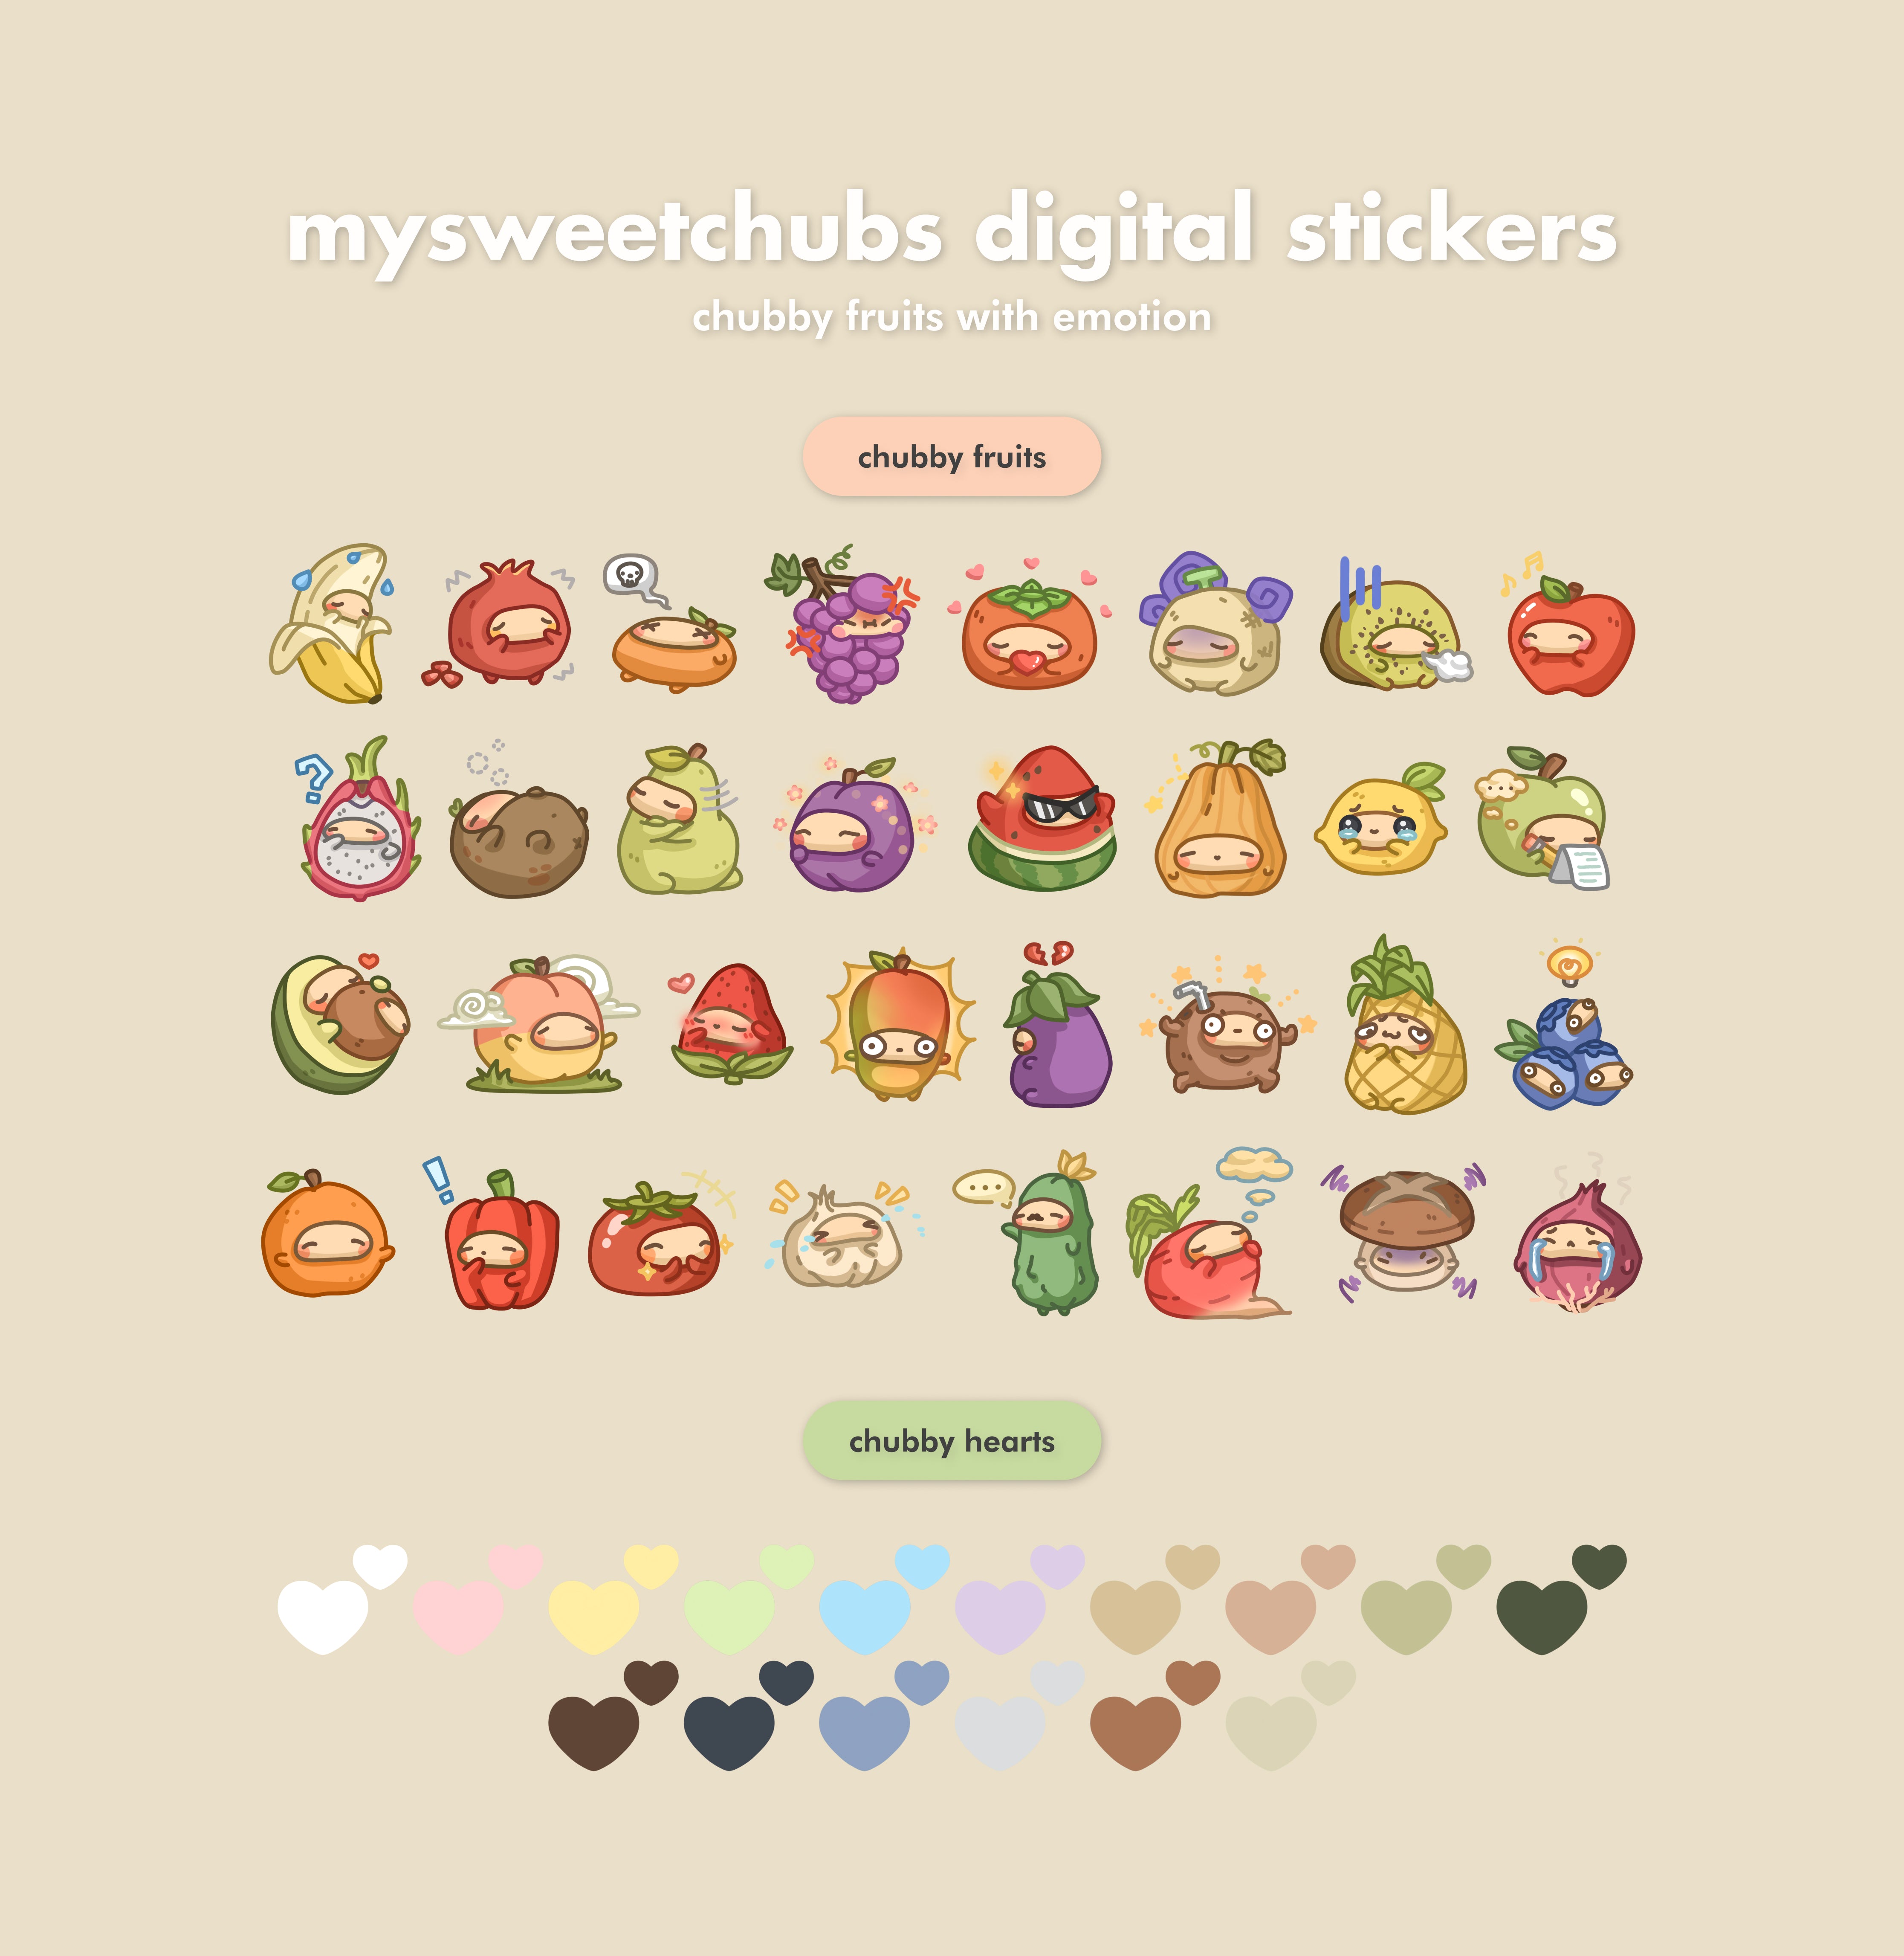 MySweetChubs Chubby Fruit Emotions Digital Stickers